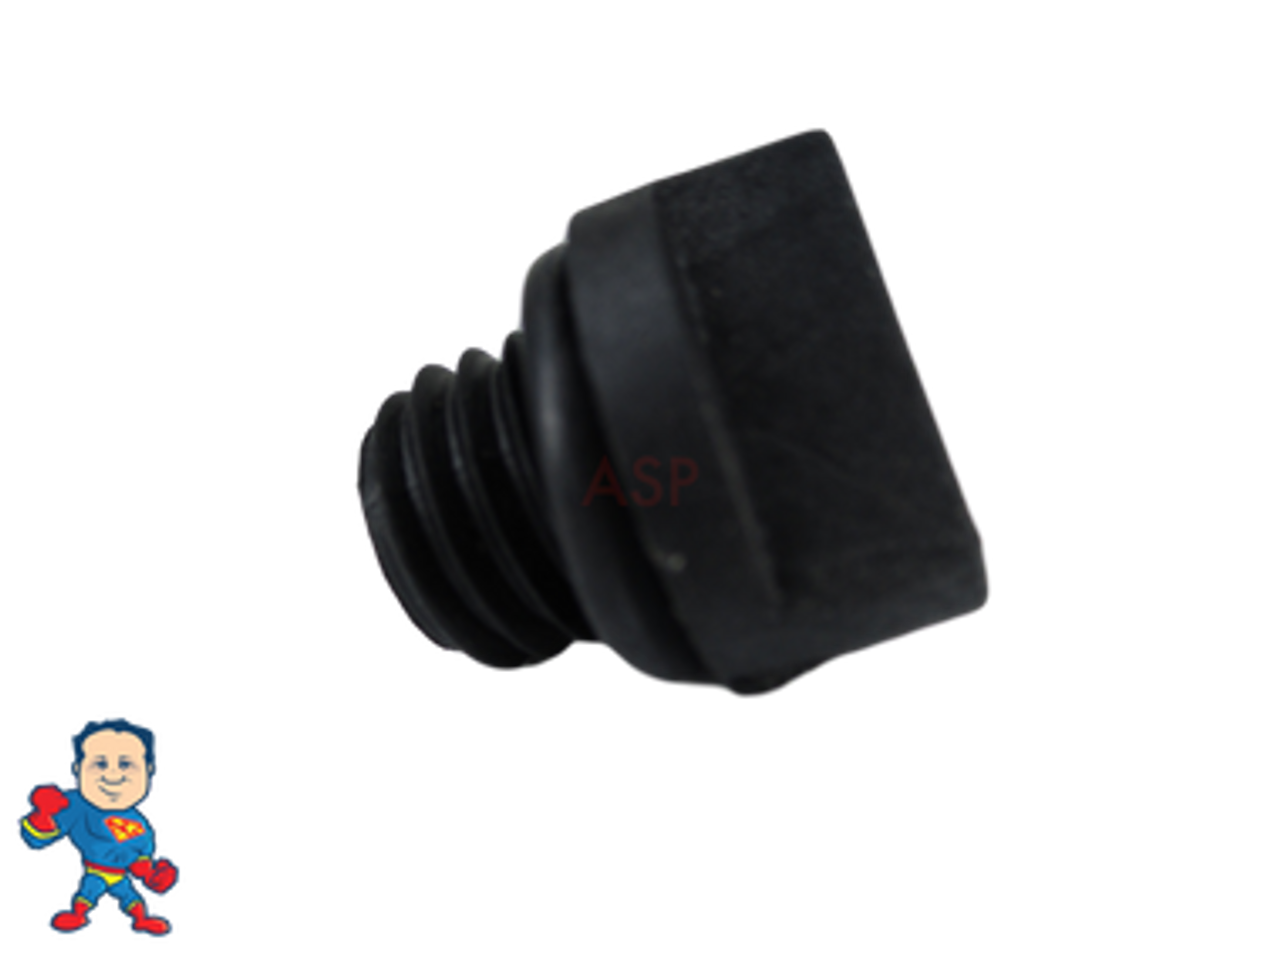 Bleeder Plug for Guangdong LX Pump Face Old Style Replacement Plug Coarse Bleeder Threads
NOTE: If your original Plug looks like this then this is the correct Bleeder Plug... See the LX New Style Bleeder Plug for the other fine thread style...